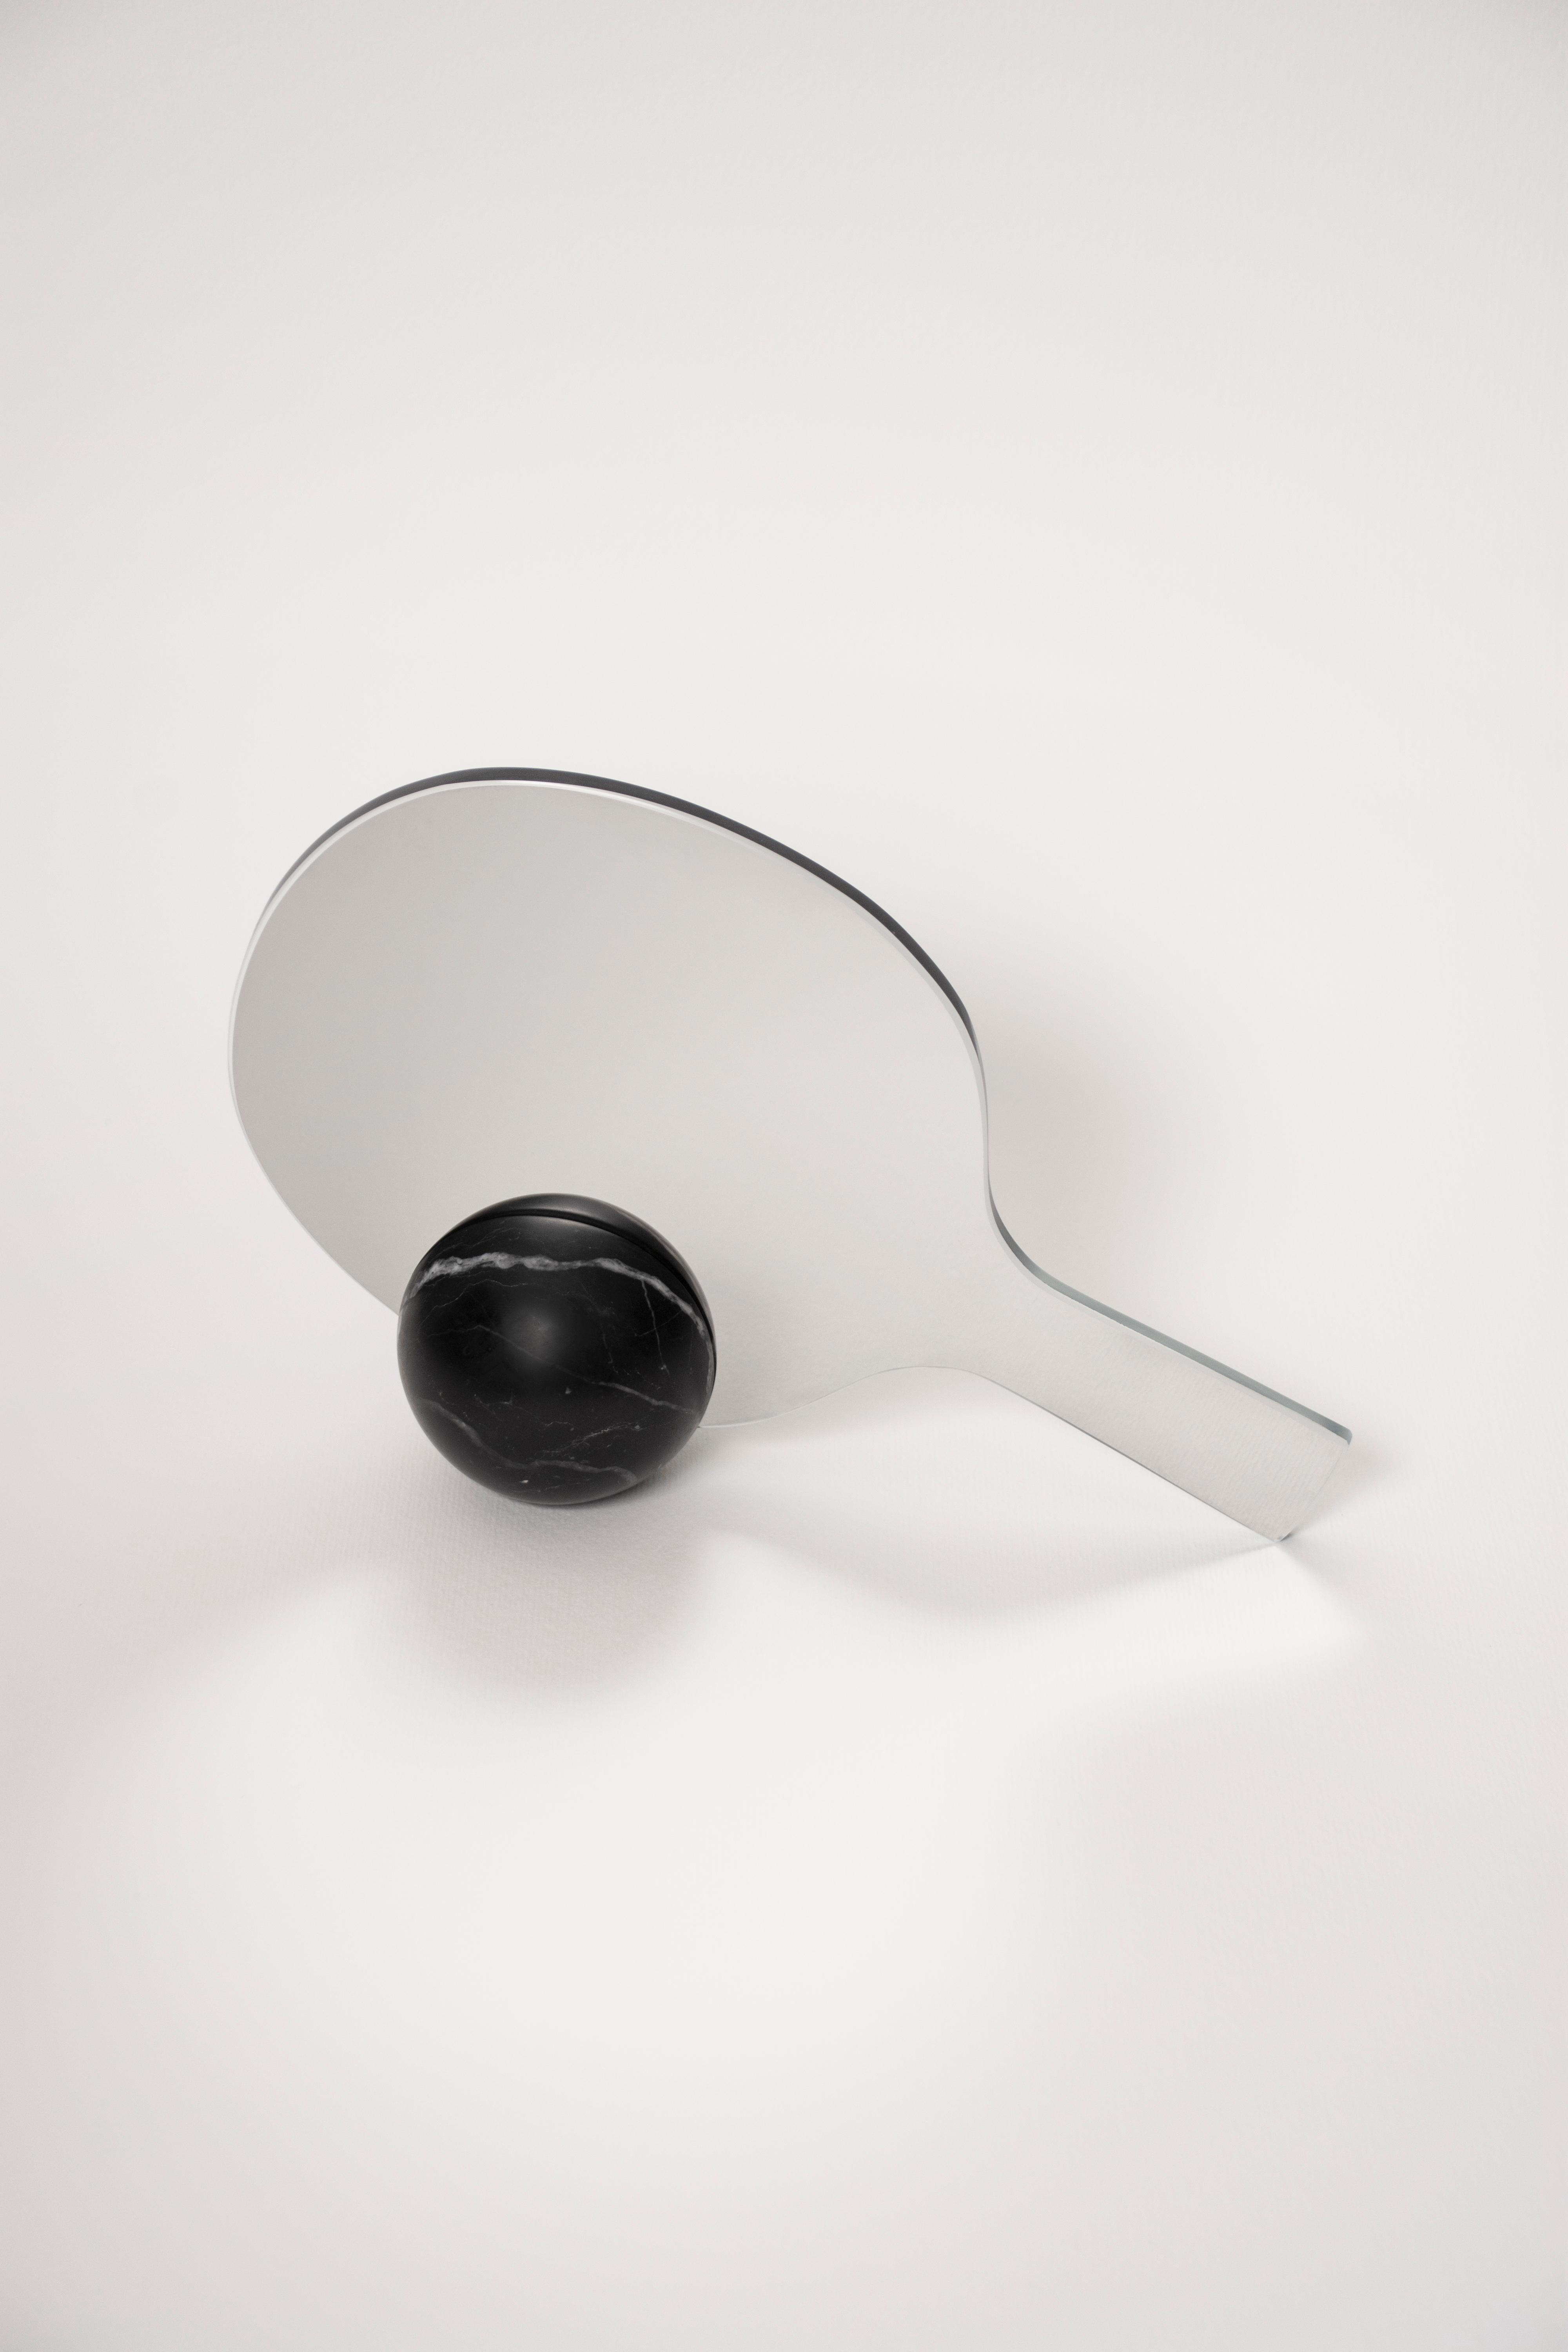 Match table and hand mirror by Studio Lievito
Dimensions: D 27 x W 7 x H 17 cm
Materials: bianco carrara marble/ nero marquina marble, mirror.
Weight: 0.8 kg

An ironic take on the idea of challenging the image reflected back at you in the mirror. A